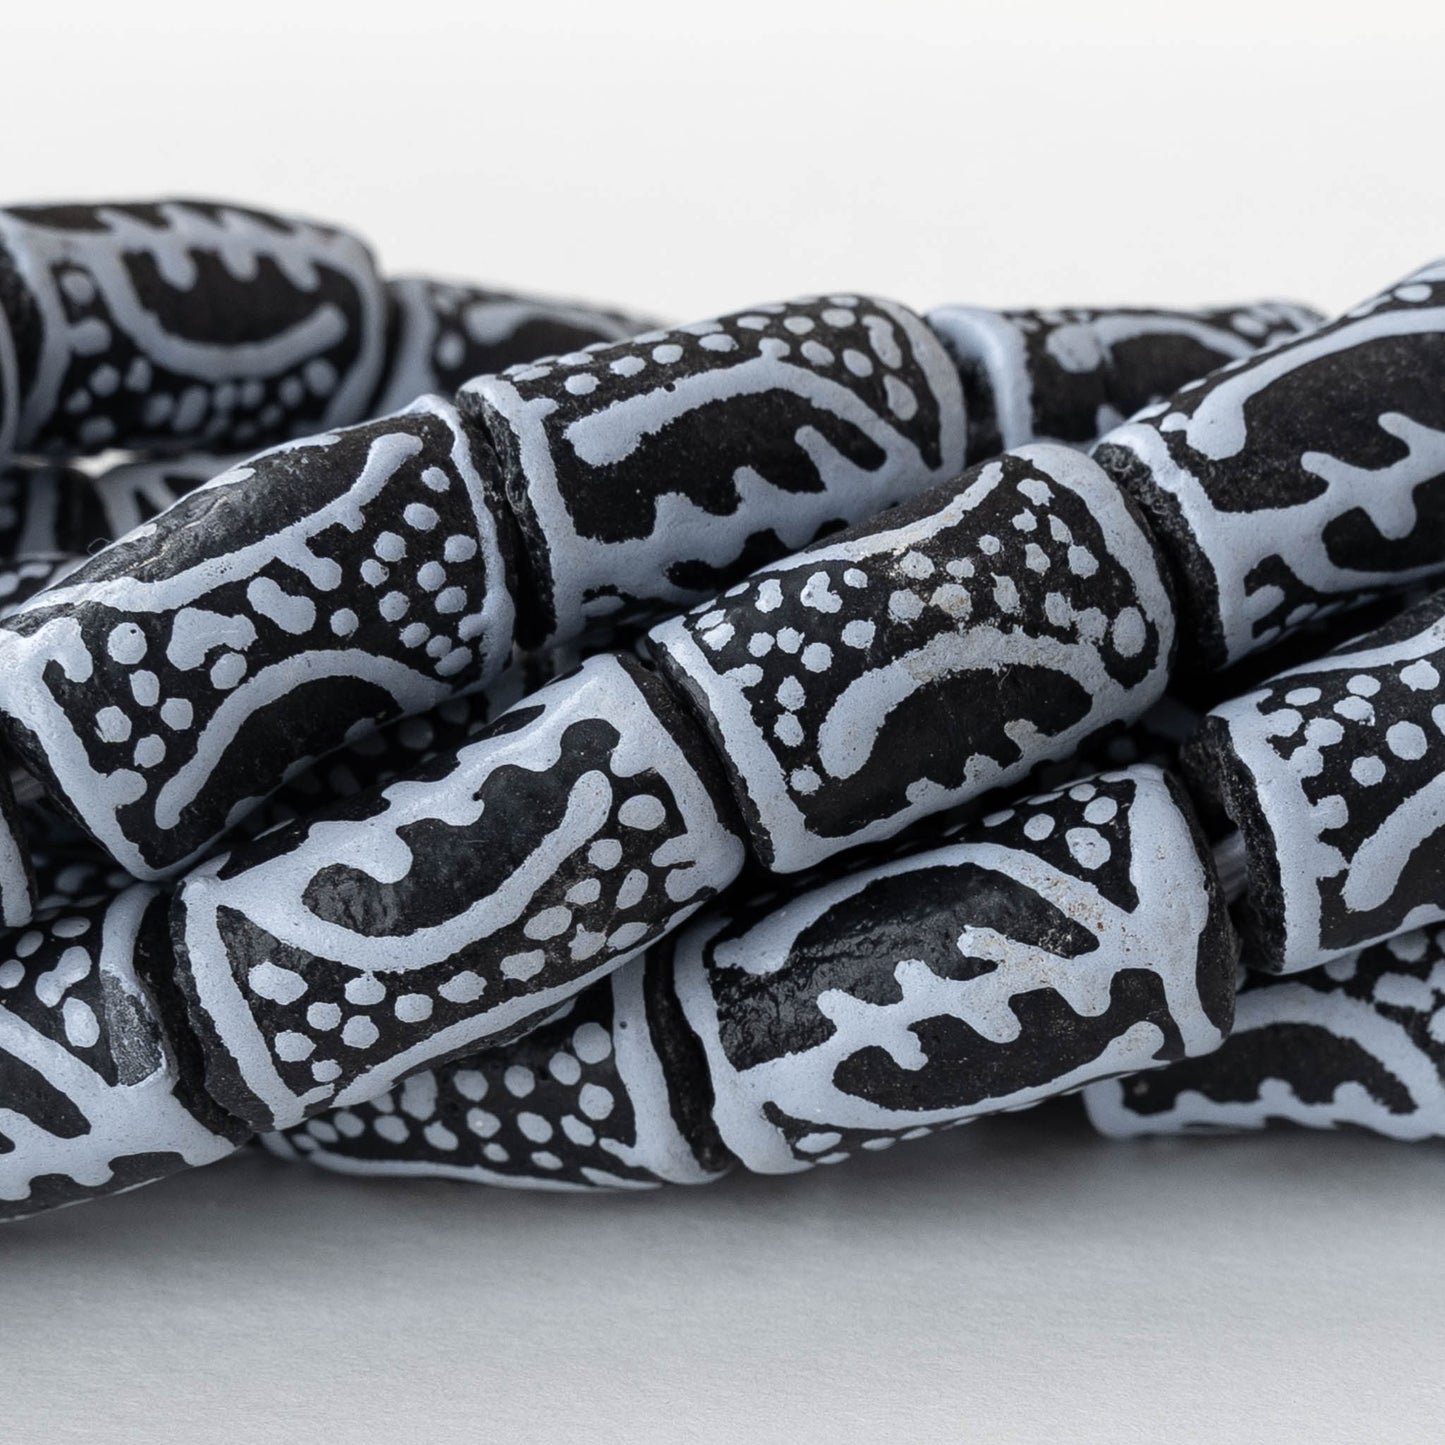 Painted Tube Beads From Ghana Africa - Large Hole - Black - 15 Beads